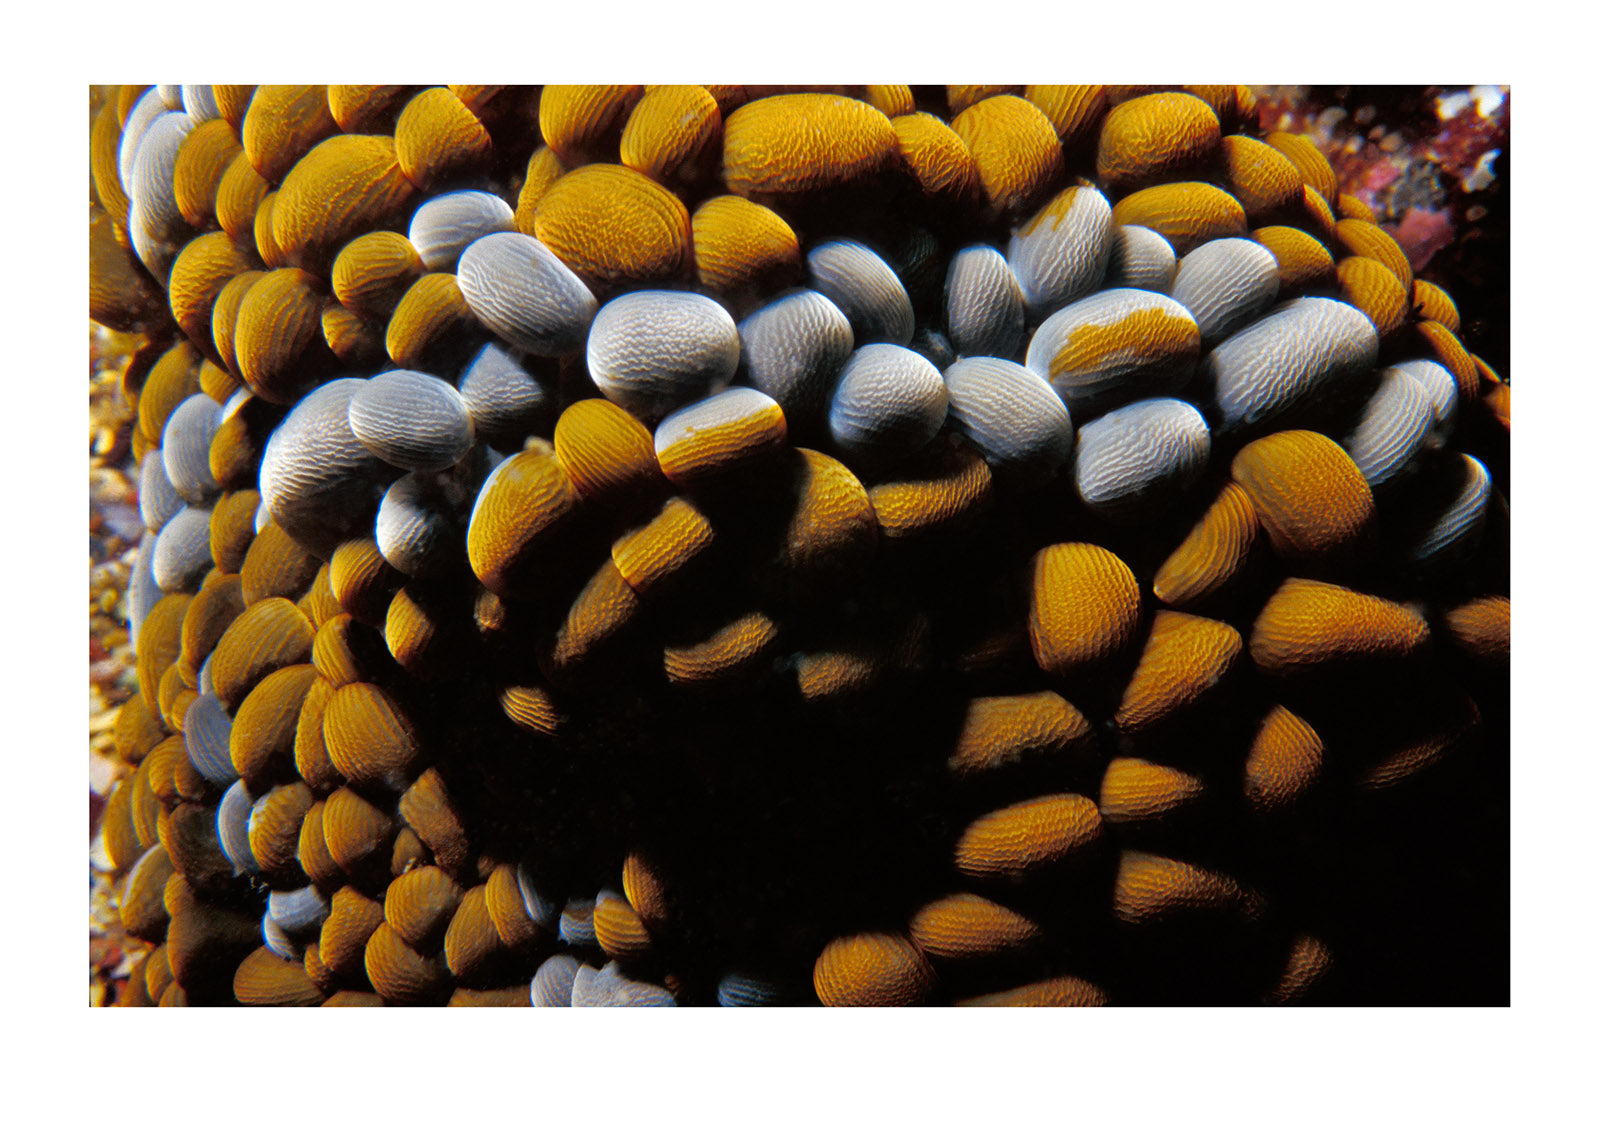 Zoanthids are an order of cnidarians commonly found in coral reefs. Merimbula, New South Wales, Australia.